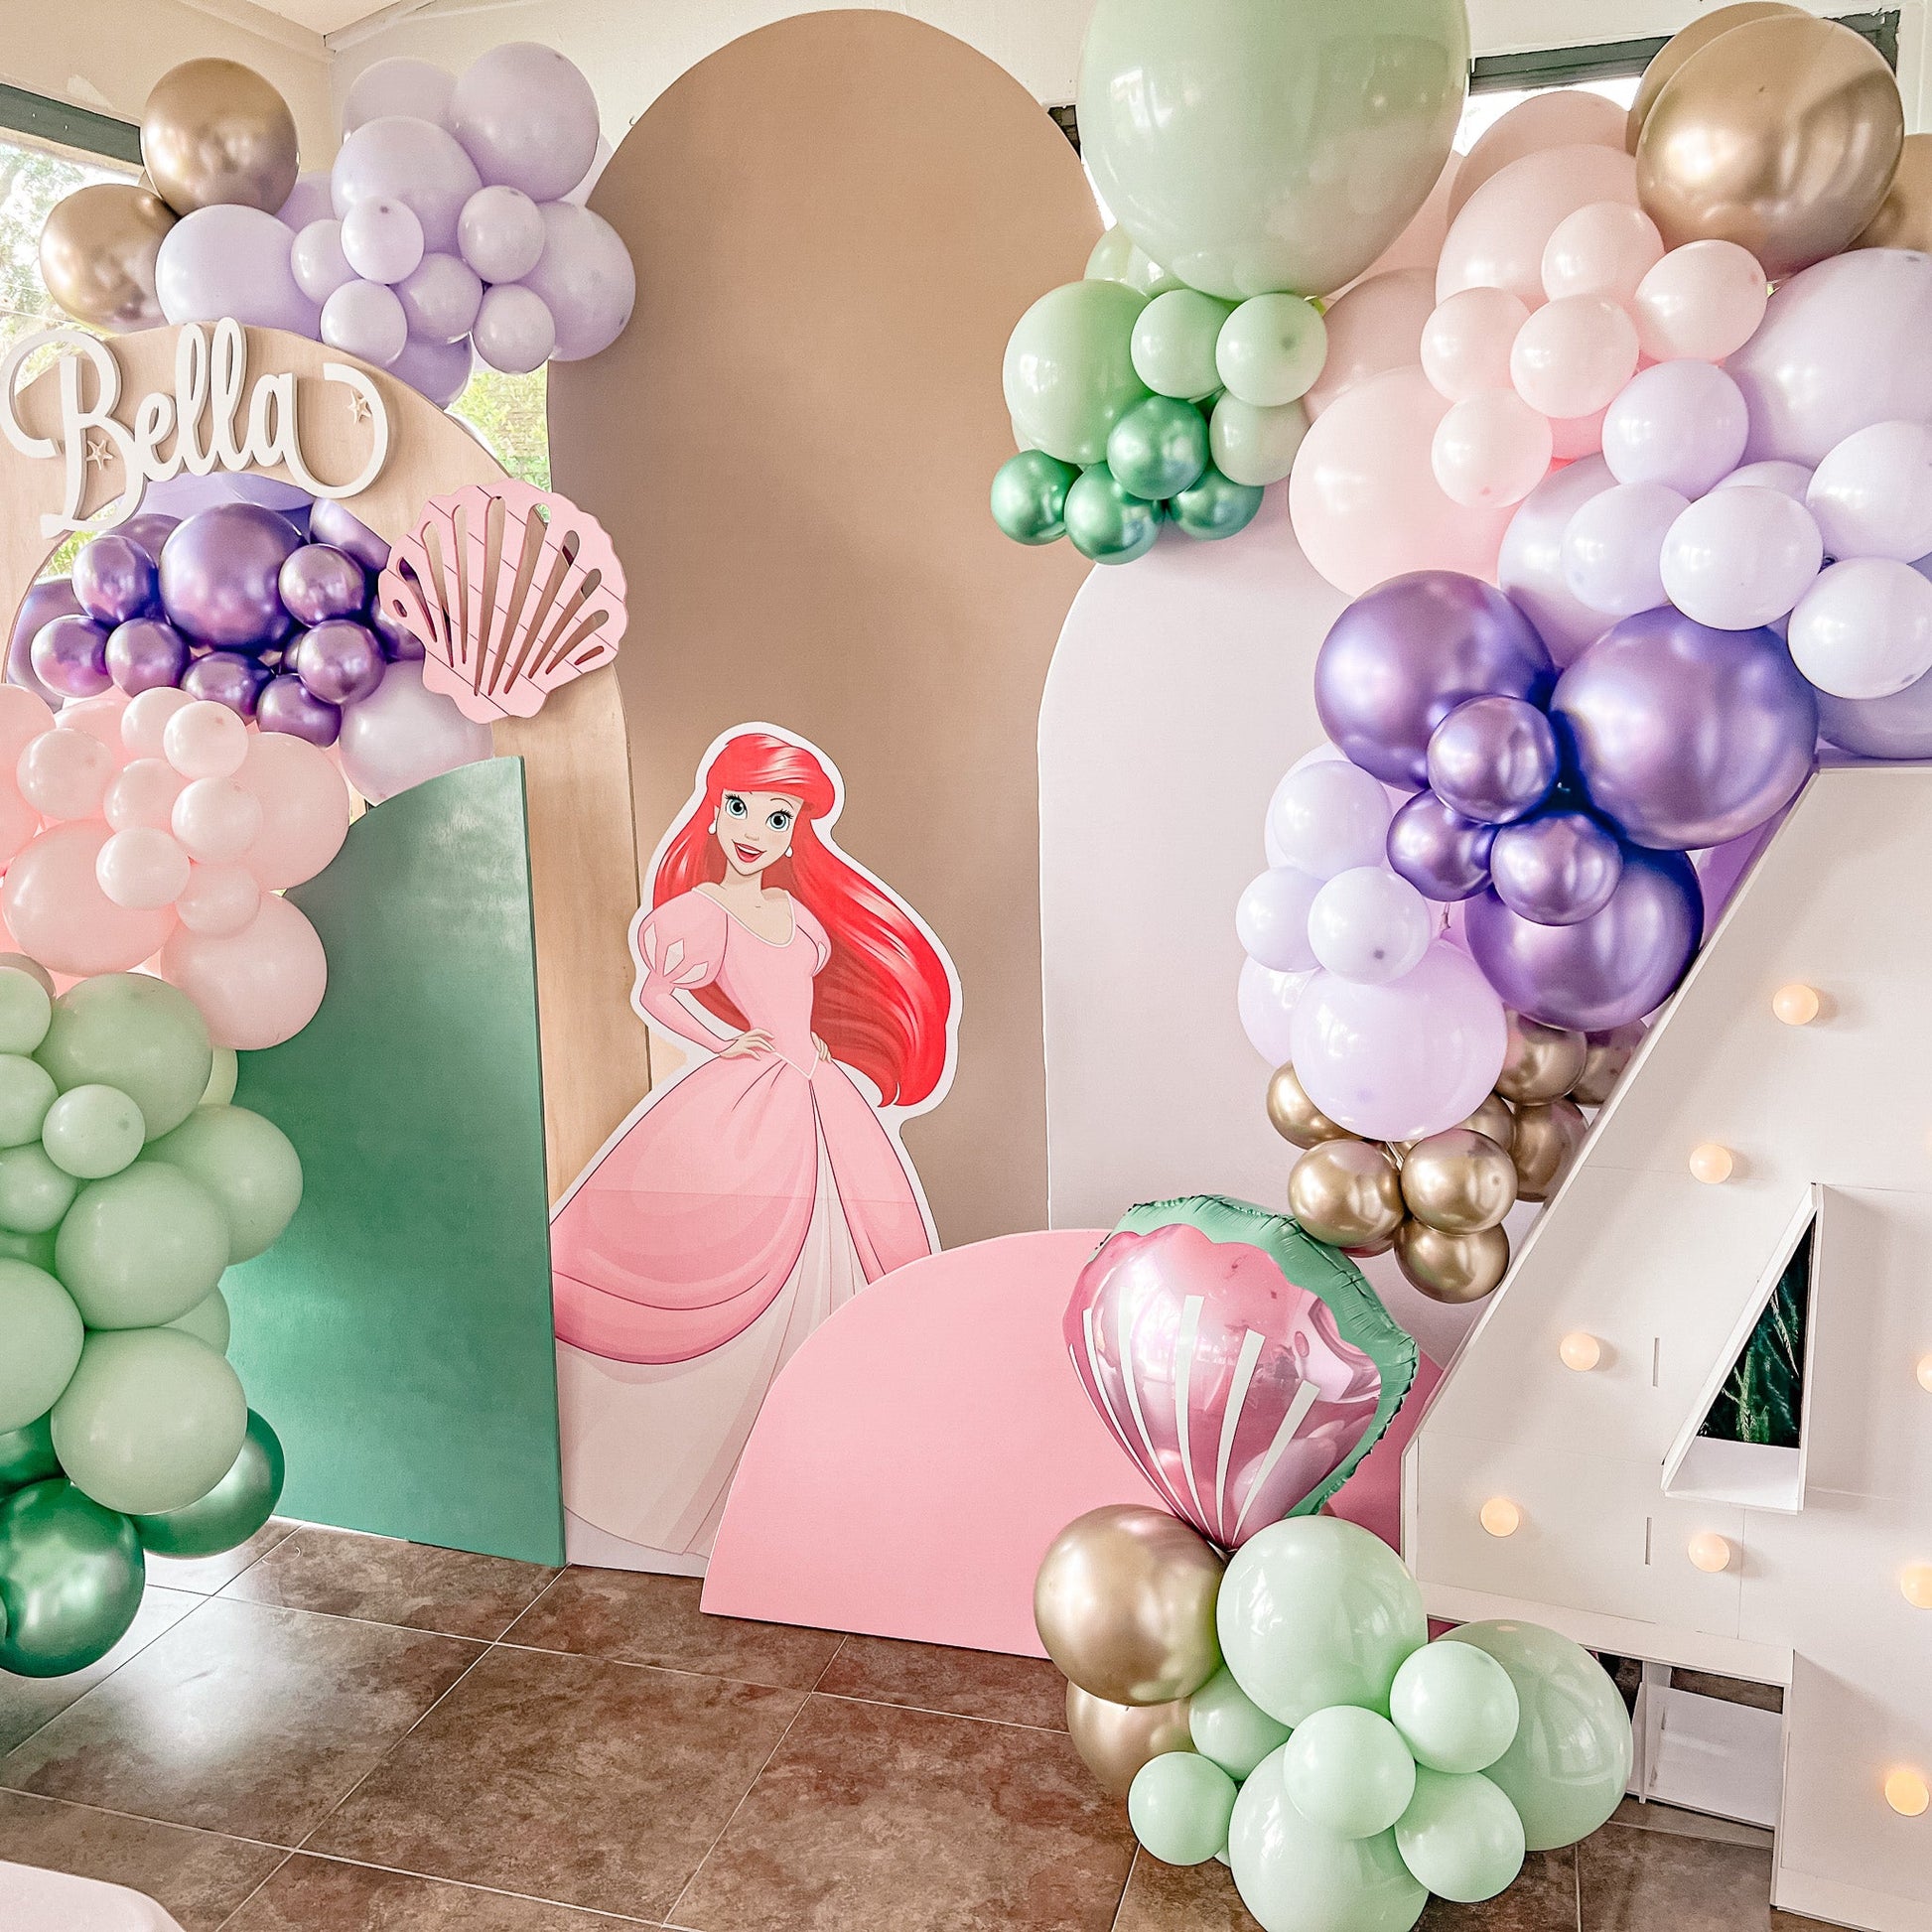 Mermaid Themed Balloon Garland Kit from Ellie's Party Supply